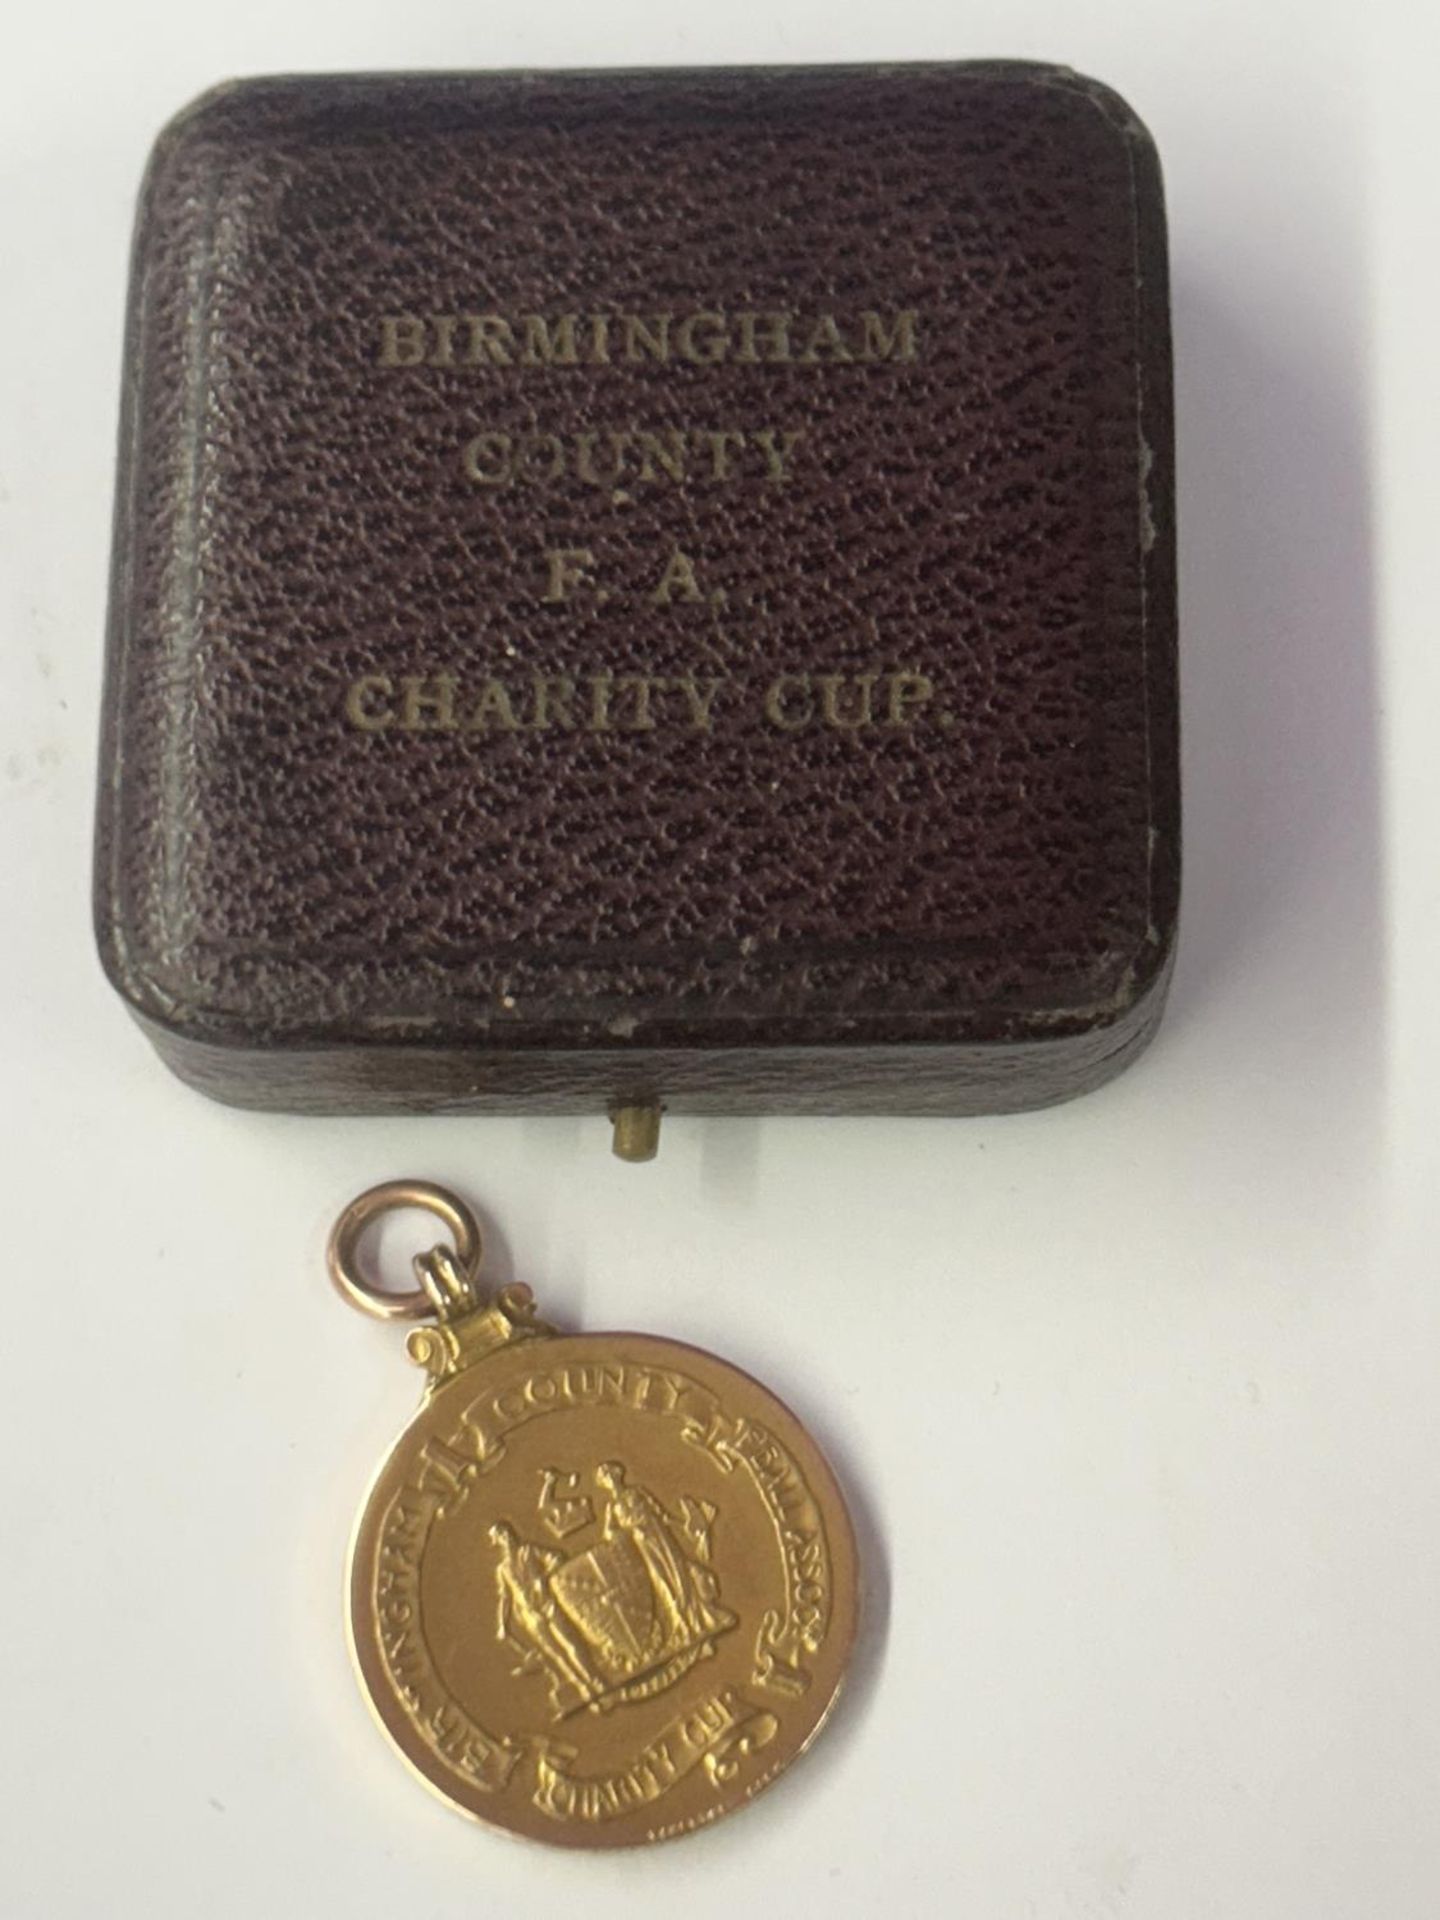 A HALLMARKED 9 CARAT GOLD BIRMINGHAM COUNTY FOOTBALL ASSOCIATION CHARITY CUP JOINT WINNERS MEDAL - Image 6 of 6